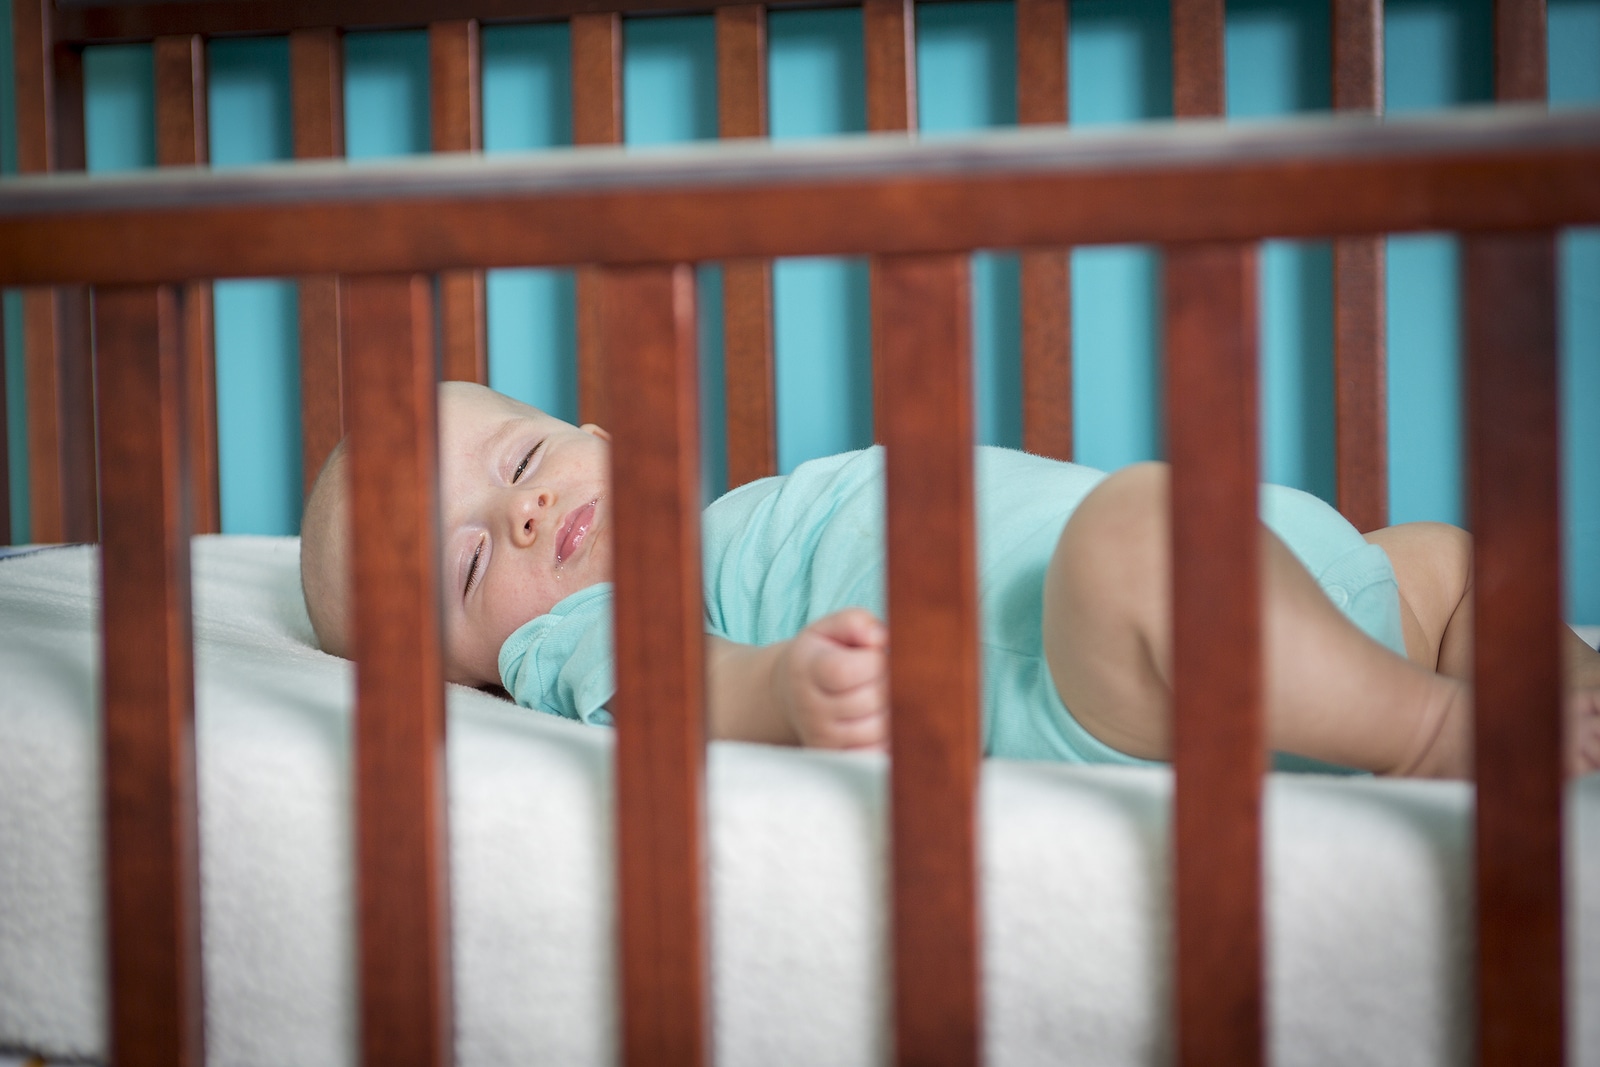 Adorable baby in his crib